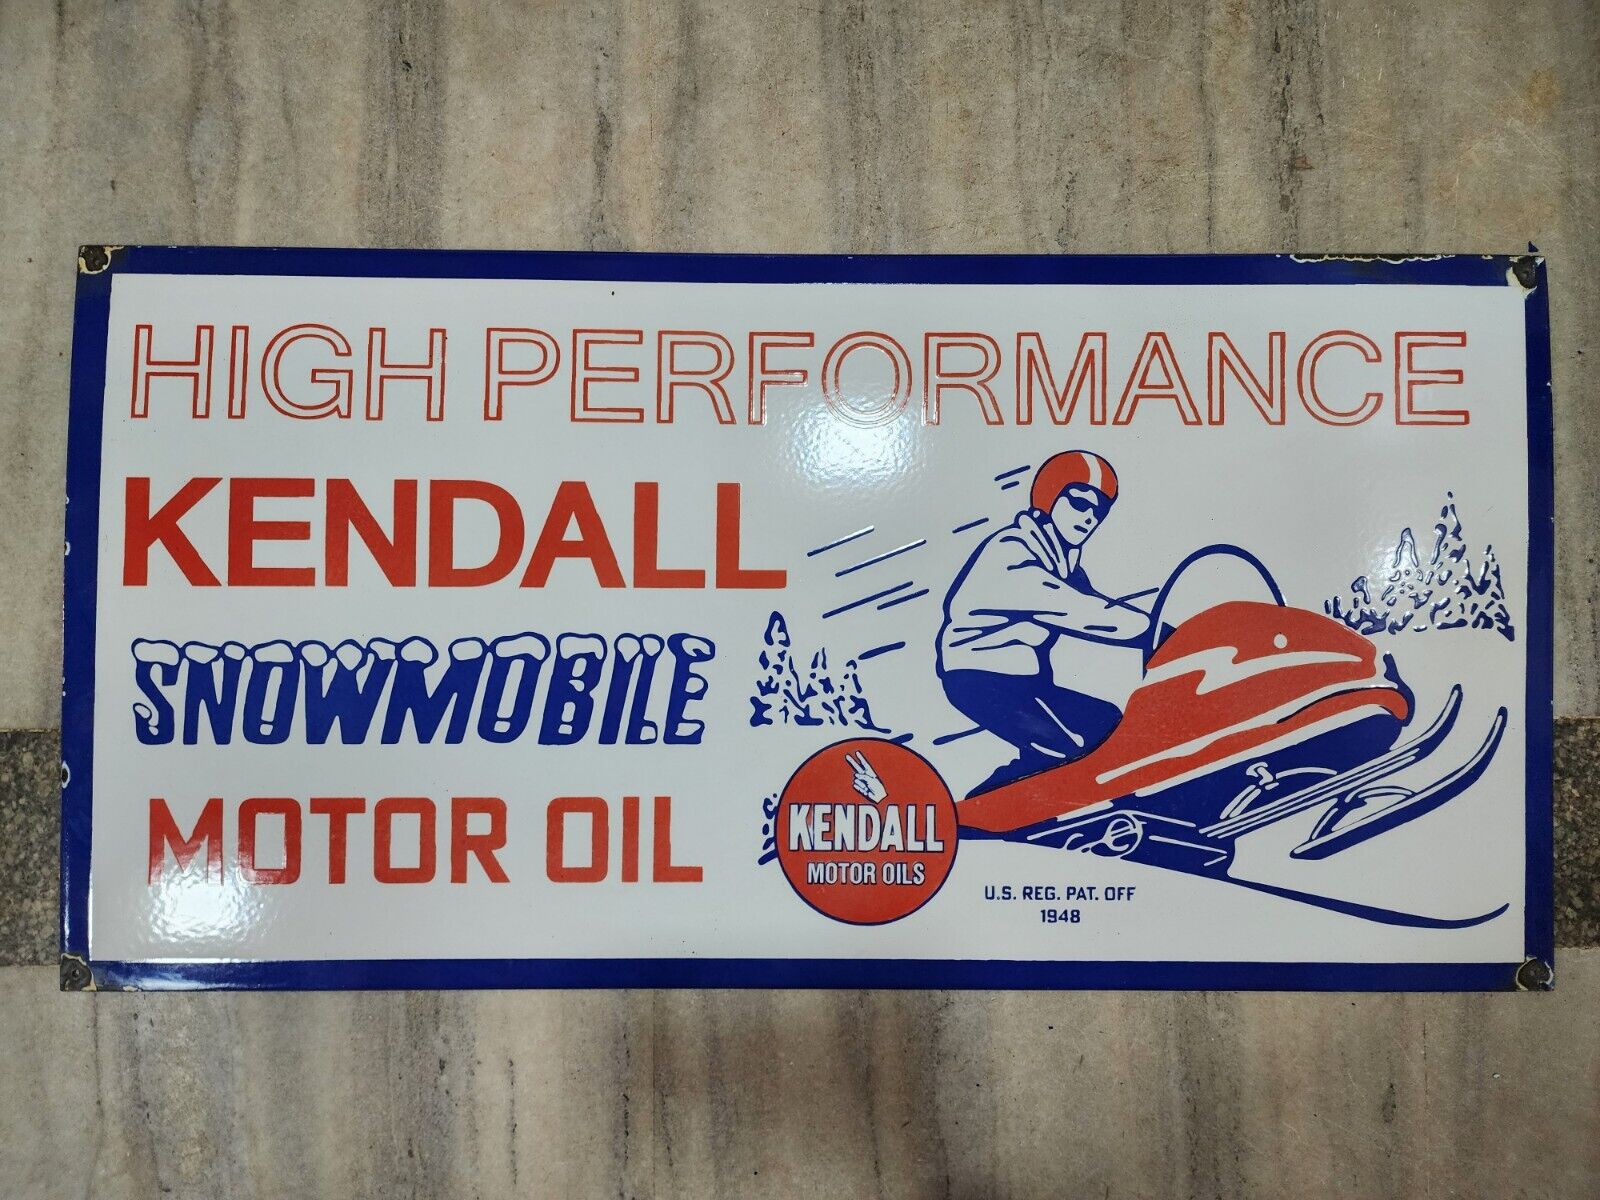 KENDALL SNOWMOBILE PORCELAIN ENAMEL SIGN 48 X 24 INCHES